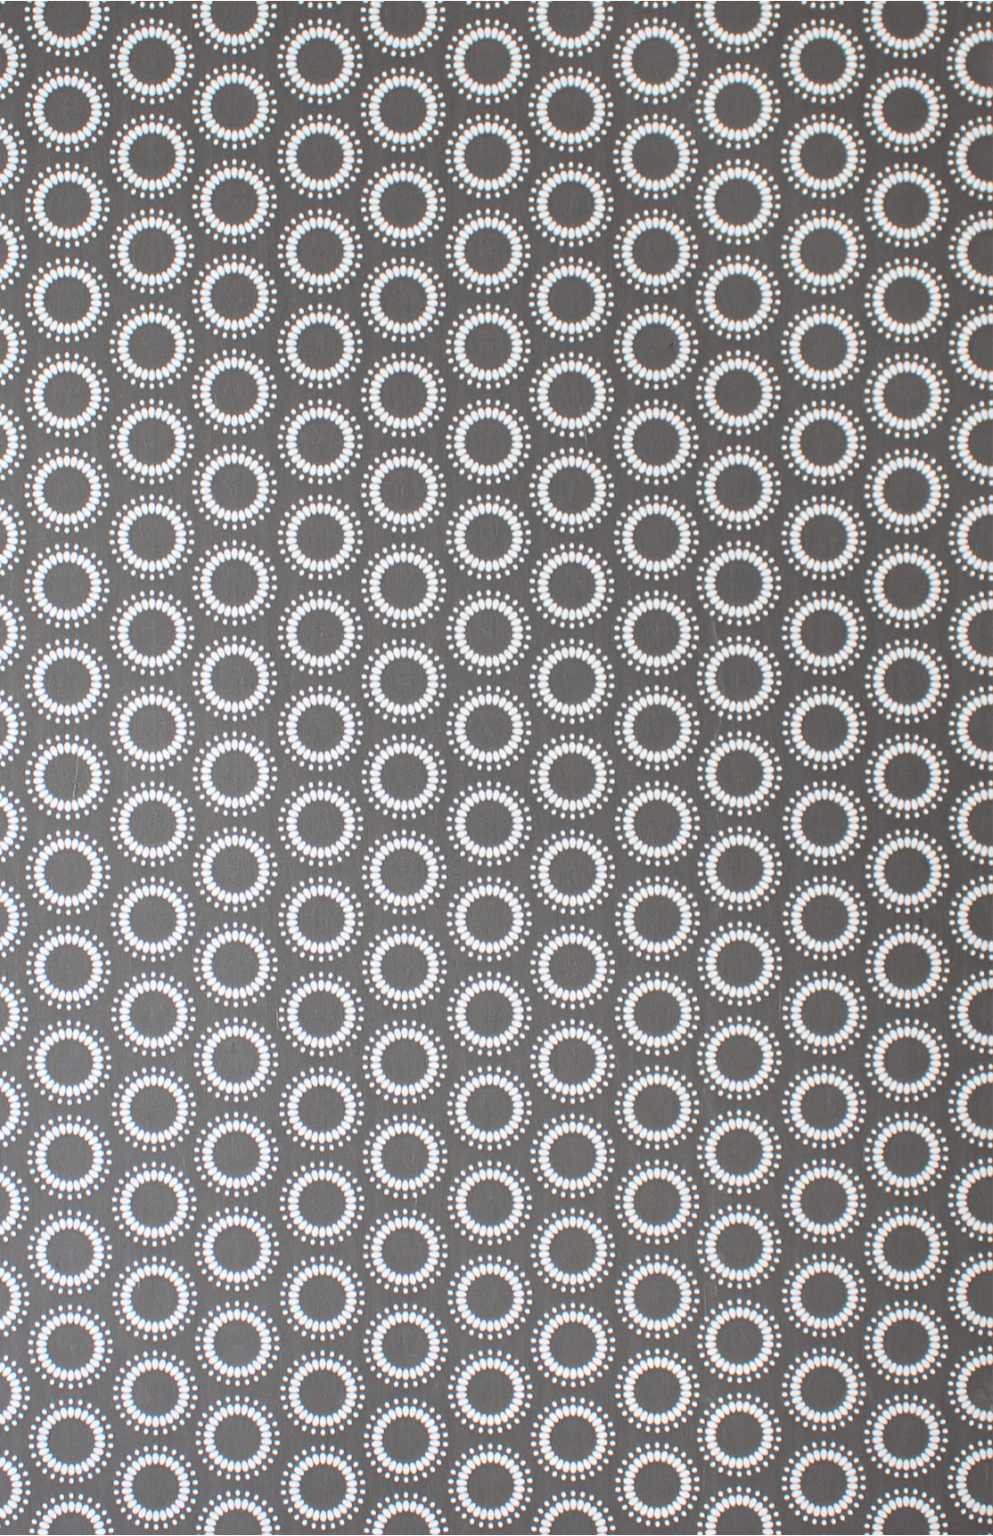 Dotted Circles